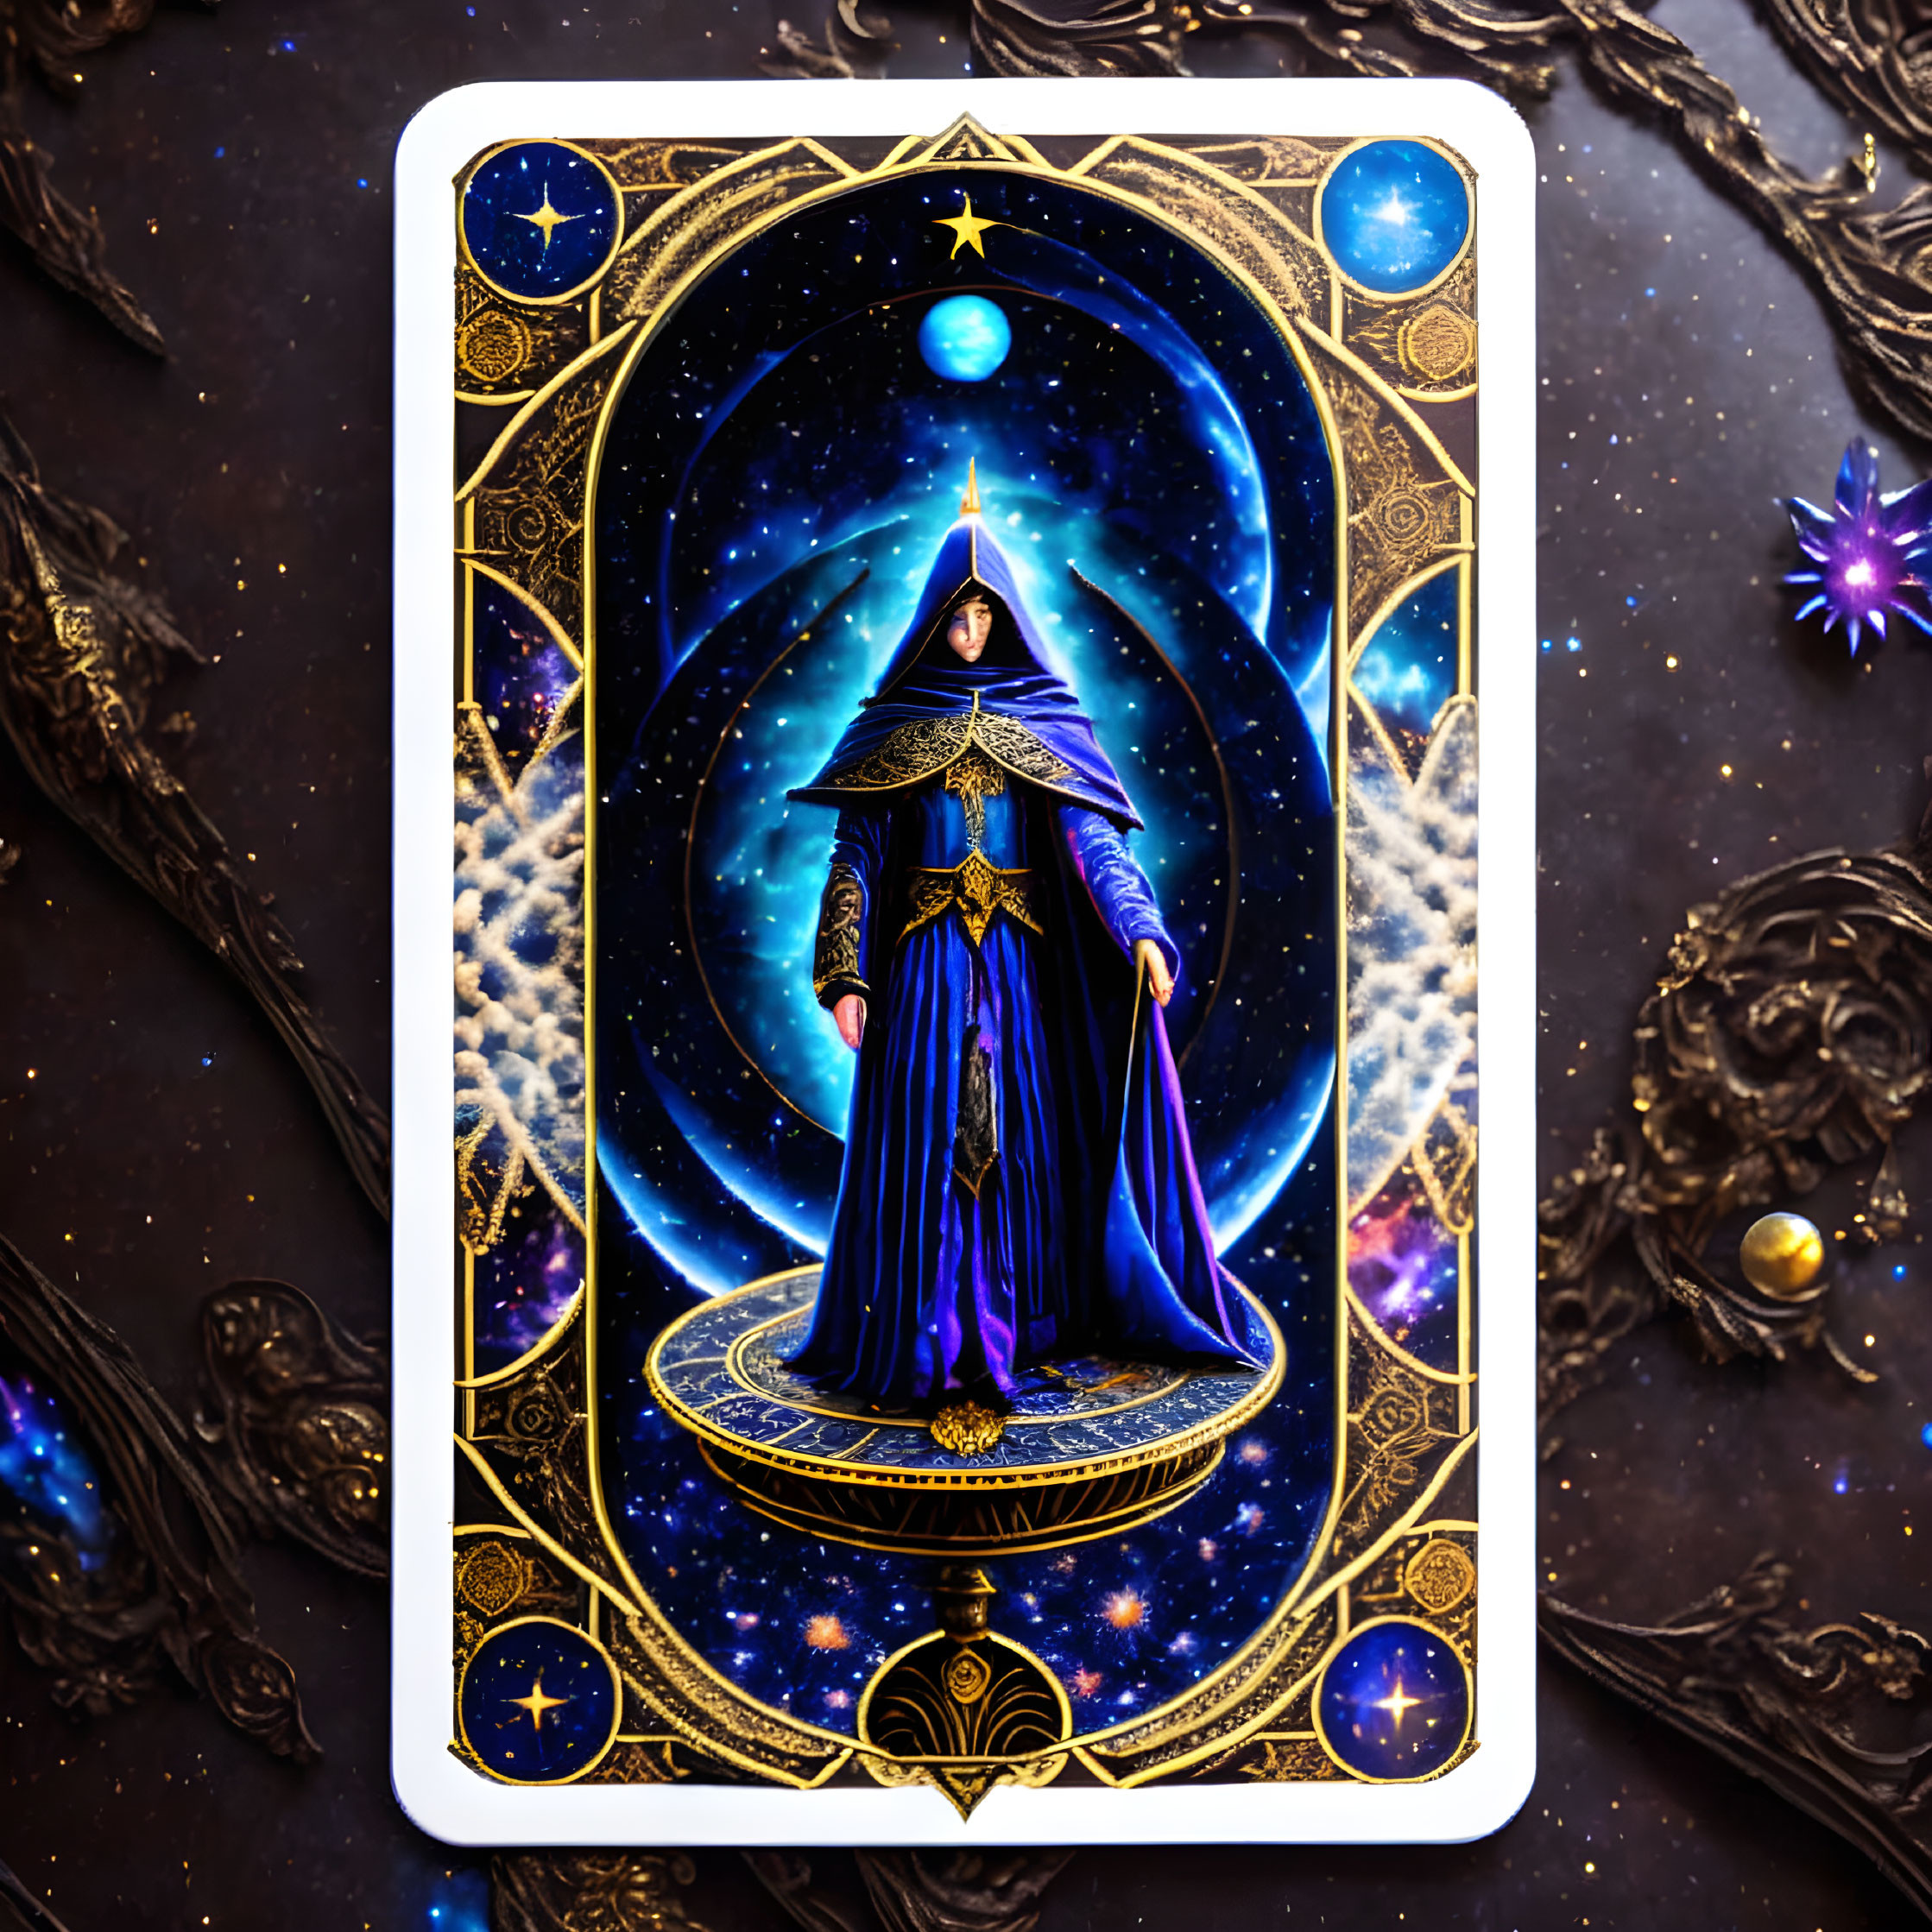 Celestial-themed tarot card with cloaked figure and stars